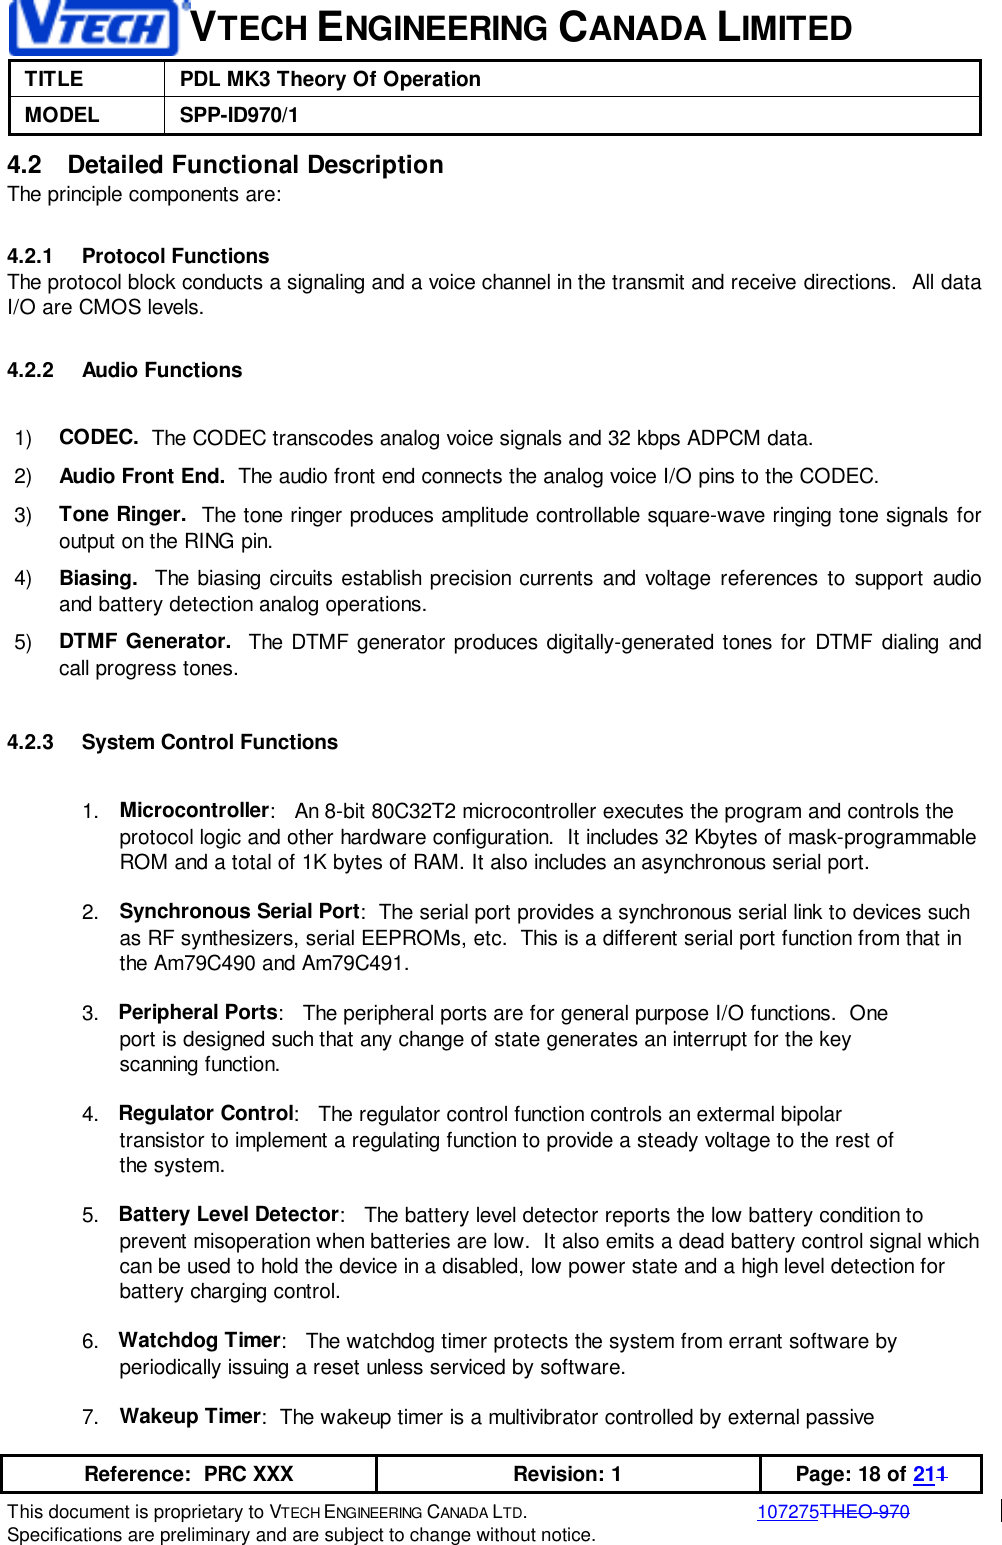 VTECH ENGINEERING CANADA LIMITEDTITLE PDL MK3 Theory Of OperationMODEL SPP-ID970/1Reference:  PRC XXX Revision: 1 Page: 18 of 211This document is proprietary to VTECH ENGINEERING CANADA LTD.107275THEO-970Specifications are preliminary and are subject to change without notice.4.2  Detailed Functional DescriptionThe principle components are:4.2.1 Protocol FunctionsThe protocol block conducts a signaling and a voice channel in the transmit and receive directions.  All dataI/O are CMOS levels.4.2.2 Audio Functions1)  CODEC.  The CODEC transcodes analog voice signals and 32 kbps ADPCM data.2)  Audio Front End.  The audio front end connects the analog voice I/O pins to the CODEC.3)  Tone Ringer.  The tone ringer produces amplitude controllable square-wave ringing tone signals foroutput on the RING pin.4)  Biasing.  The biasing circuits establish precision currents and voltage references to support audioand battery detection analog operations.5)  DTMF Generator.  The DTMF generator produces digitally-generated tones for DTMF dialing andcall progress tones.4.2.3  System Control Functions1.  Microcontroller:   An 8-bit 80C32T2 microcontroller executes the program and controls theprotocol logic and other hardware configuration.  It includes 32 Kbytes of mask-programmableROM and a total of 1K bytes of RAM. It also includes an asynchronous serial port.2.  Synchronous Serial Port:  The serial port provides a synchronous serial link to devices suchas RF synthesizers, serial EEPROMs, etc.  This is a different serial port function from that inthe Am79C490 and Am79C491.3.   Peripheral Ports:   The peripheral ports are for general purpose I/O functions.  One      port is designed such that any change of state generates an interrupt for the key      scanning function.4.   Regulator Control:   The regulator control function controls an extermal bipolar      transistor to implement a regulating function to provide a steady voltage to the rest of      the system.5.   Battery Level Detector:   The battery level detector reports the low battery condition toprevent misoperation when batteries are low.  It also emits a dead battery control signal whichcan be used to hold the device in a disabled, low power state and a high level detection forbattery charging control.6.   Watchdog Timer:   The watchdog timer protects the system from errant software by      periodically issuing a reset unless serviced by software.7.  Wakeup Timer:  The wakeup timer is a multivibrator controlled by external passive